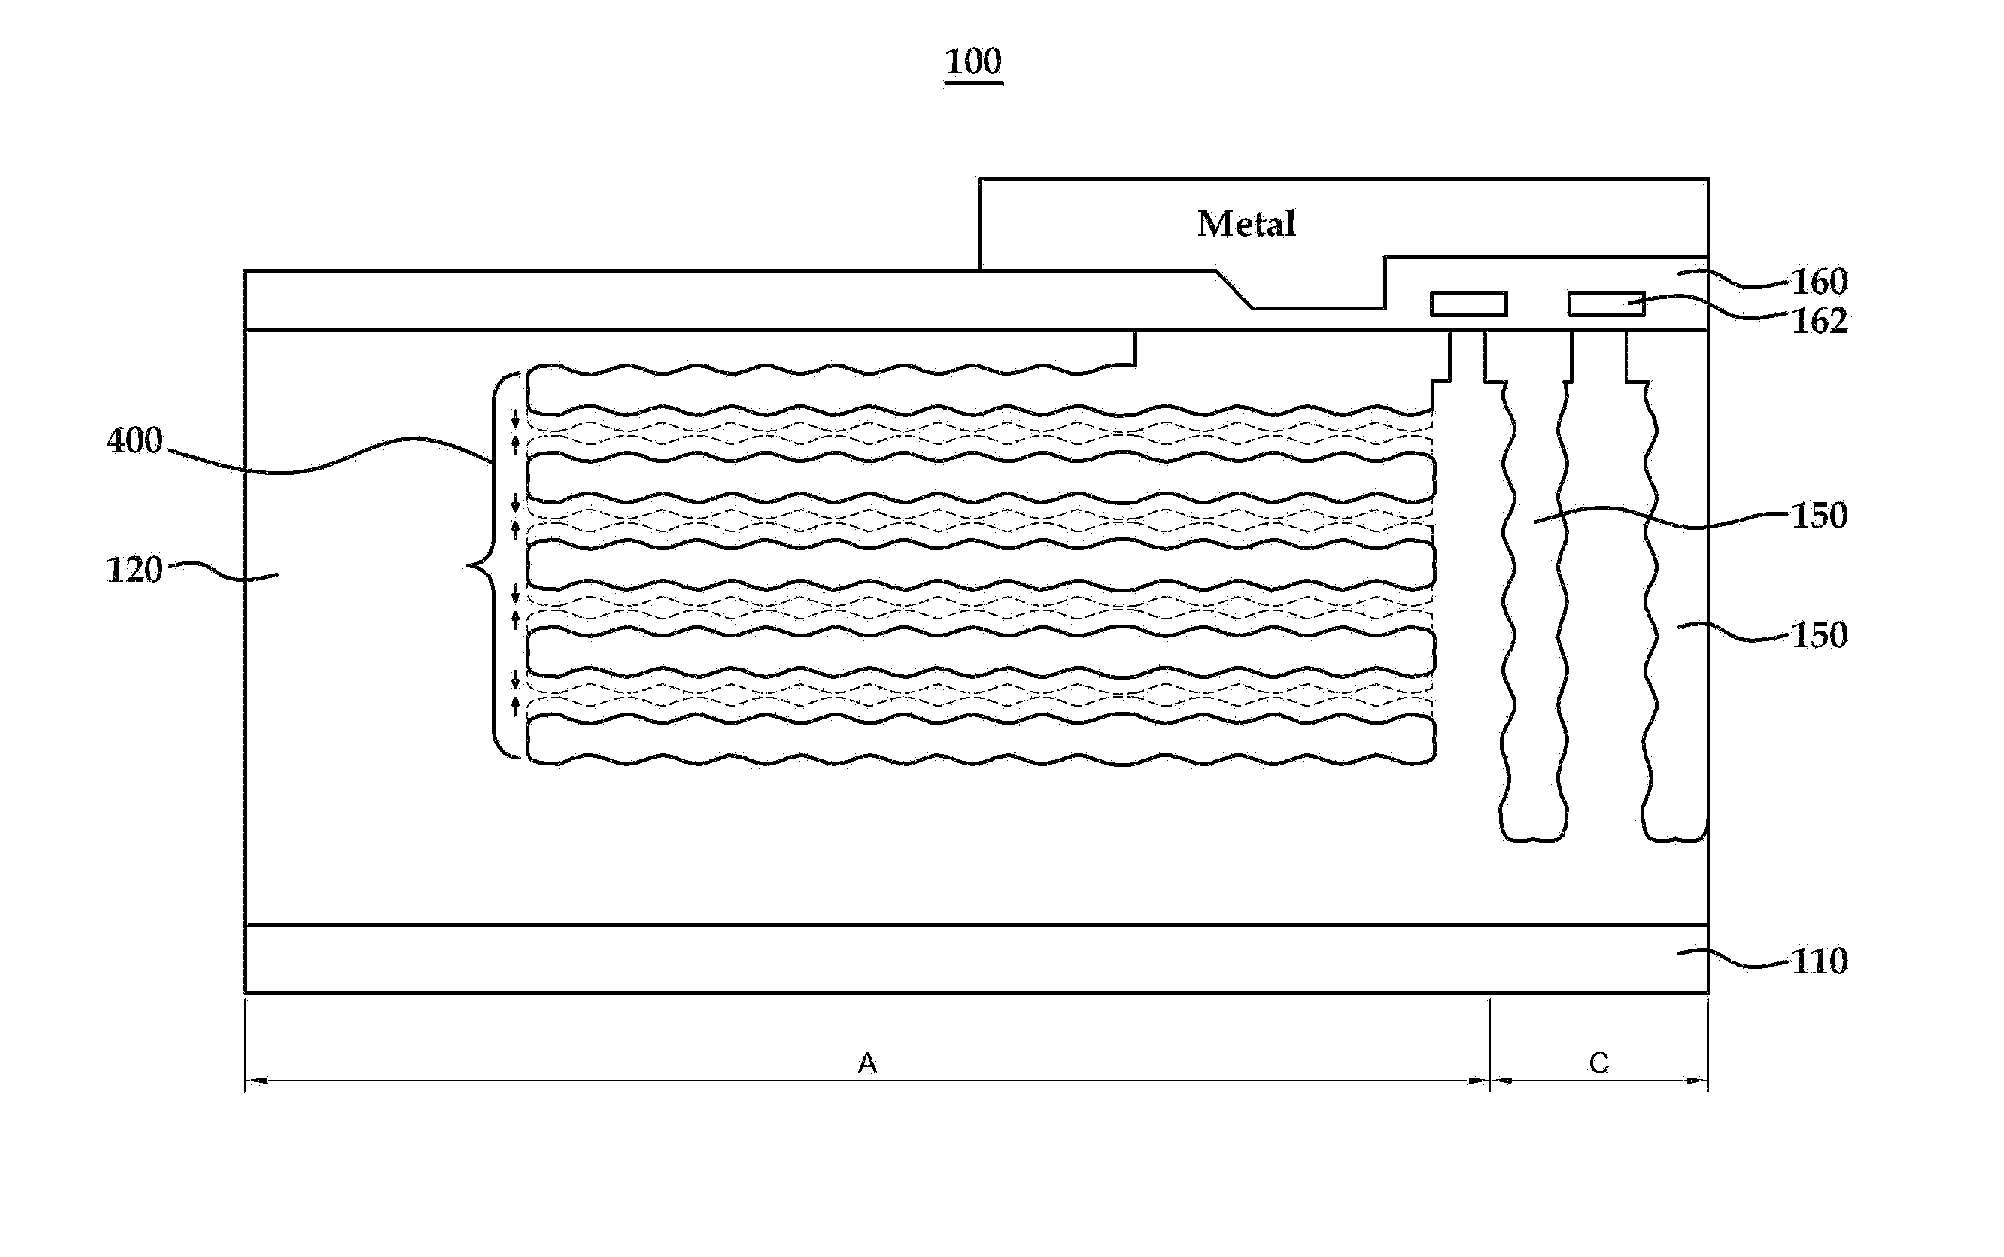 Super junction semiconductor device